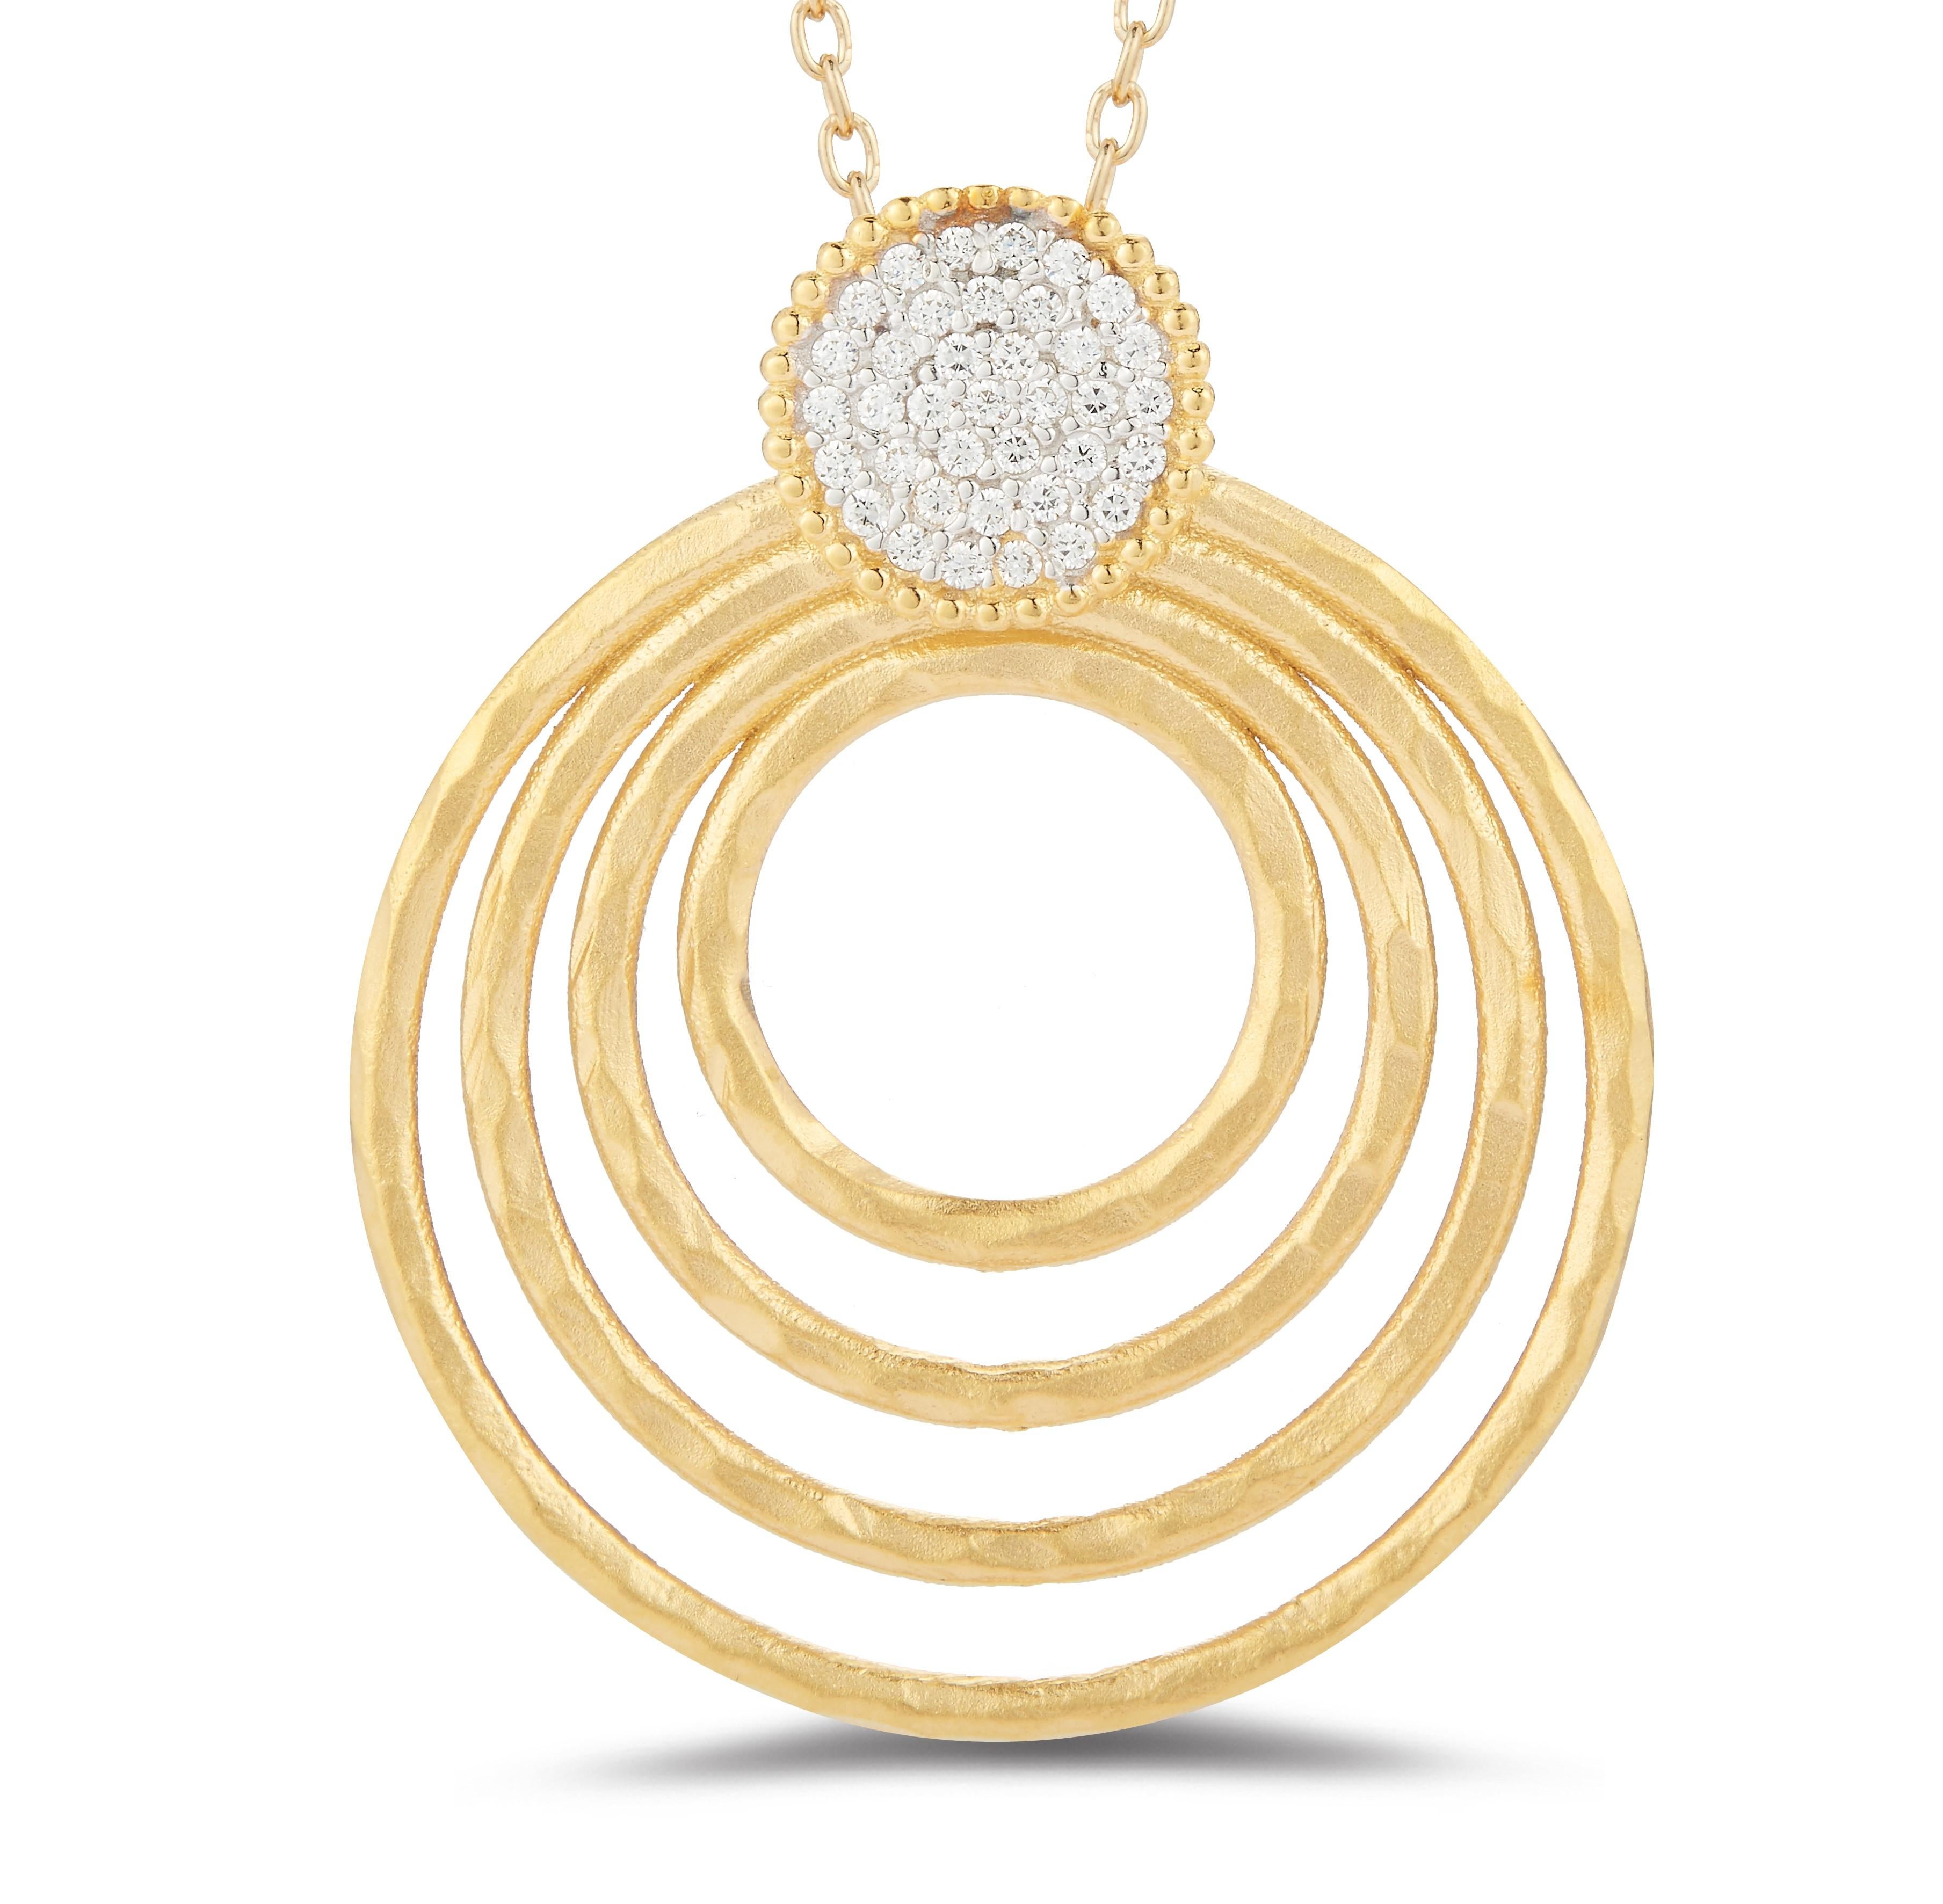 14 Karat Yellow Gold Hand-Crafted Matte and Hammer-Finished Four Cascading Circles Pendant, Accented with 0.22 Carats of a Pave Set Diamond Circle, Sliding on a 16